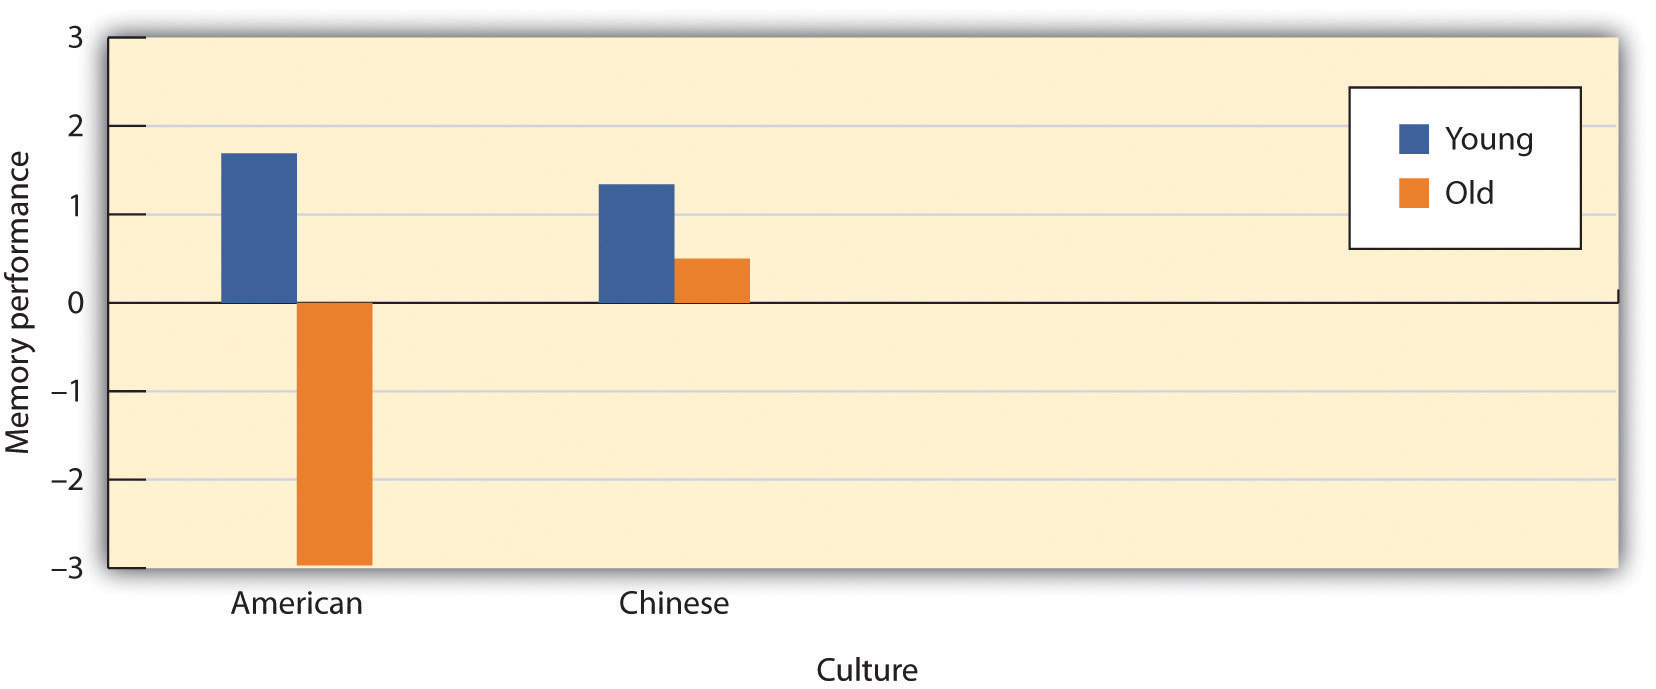 Is Memory Influenced by Cultural Stereotypes? Levy and Langer (1994) found that although younger samples did not differ, older Americans performed significantly more poorly on memory tasks than did older Chinese, and that these differences were due to different expectations about memory in the two cultures.